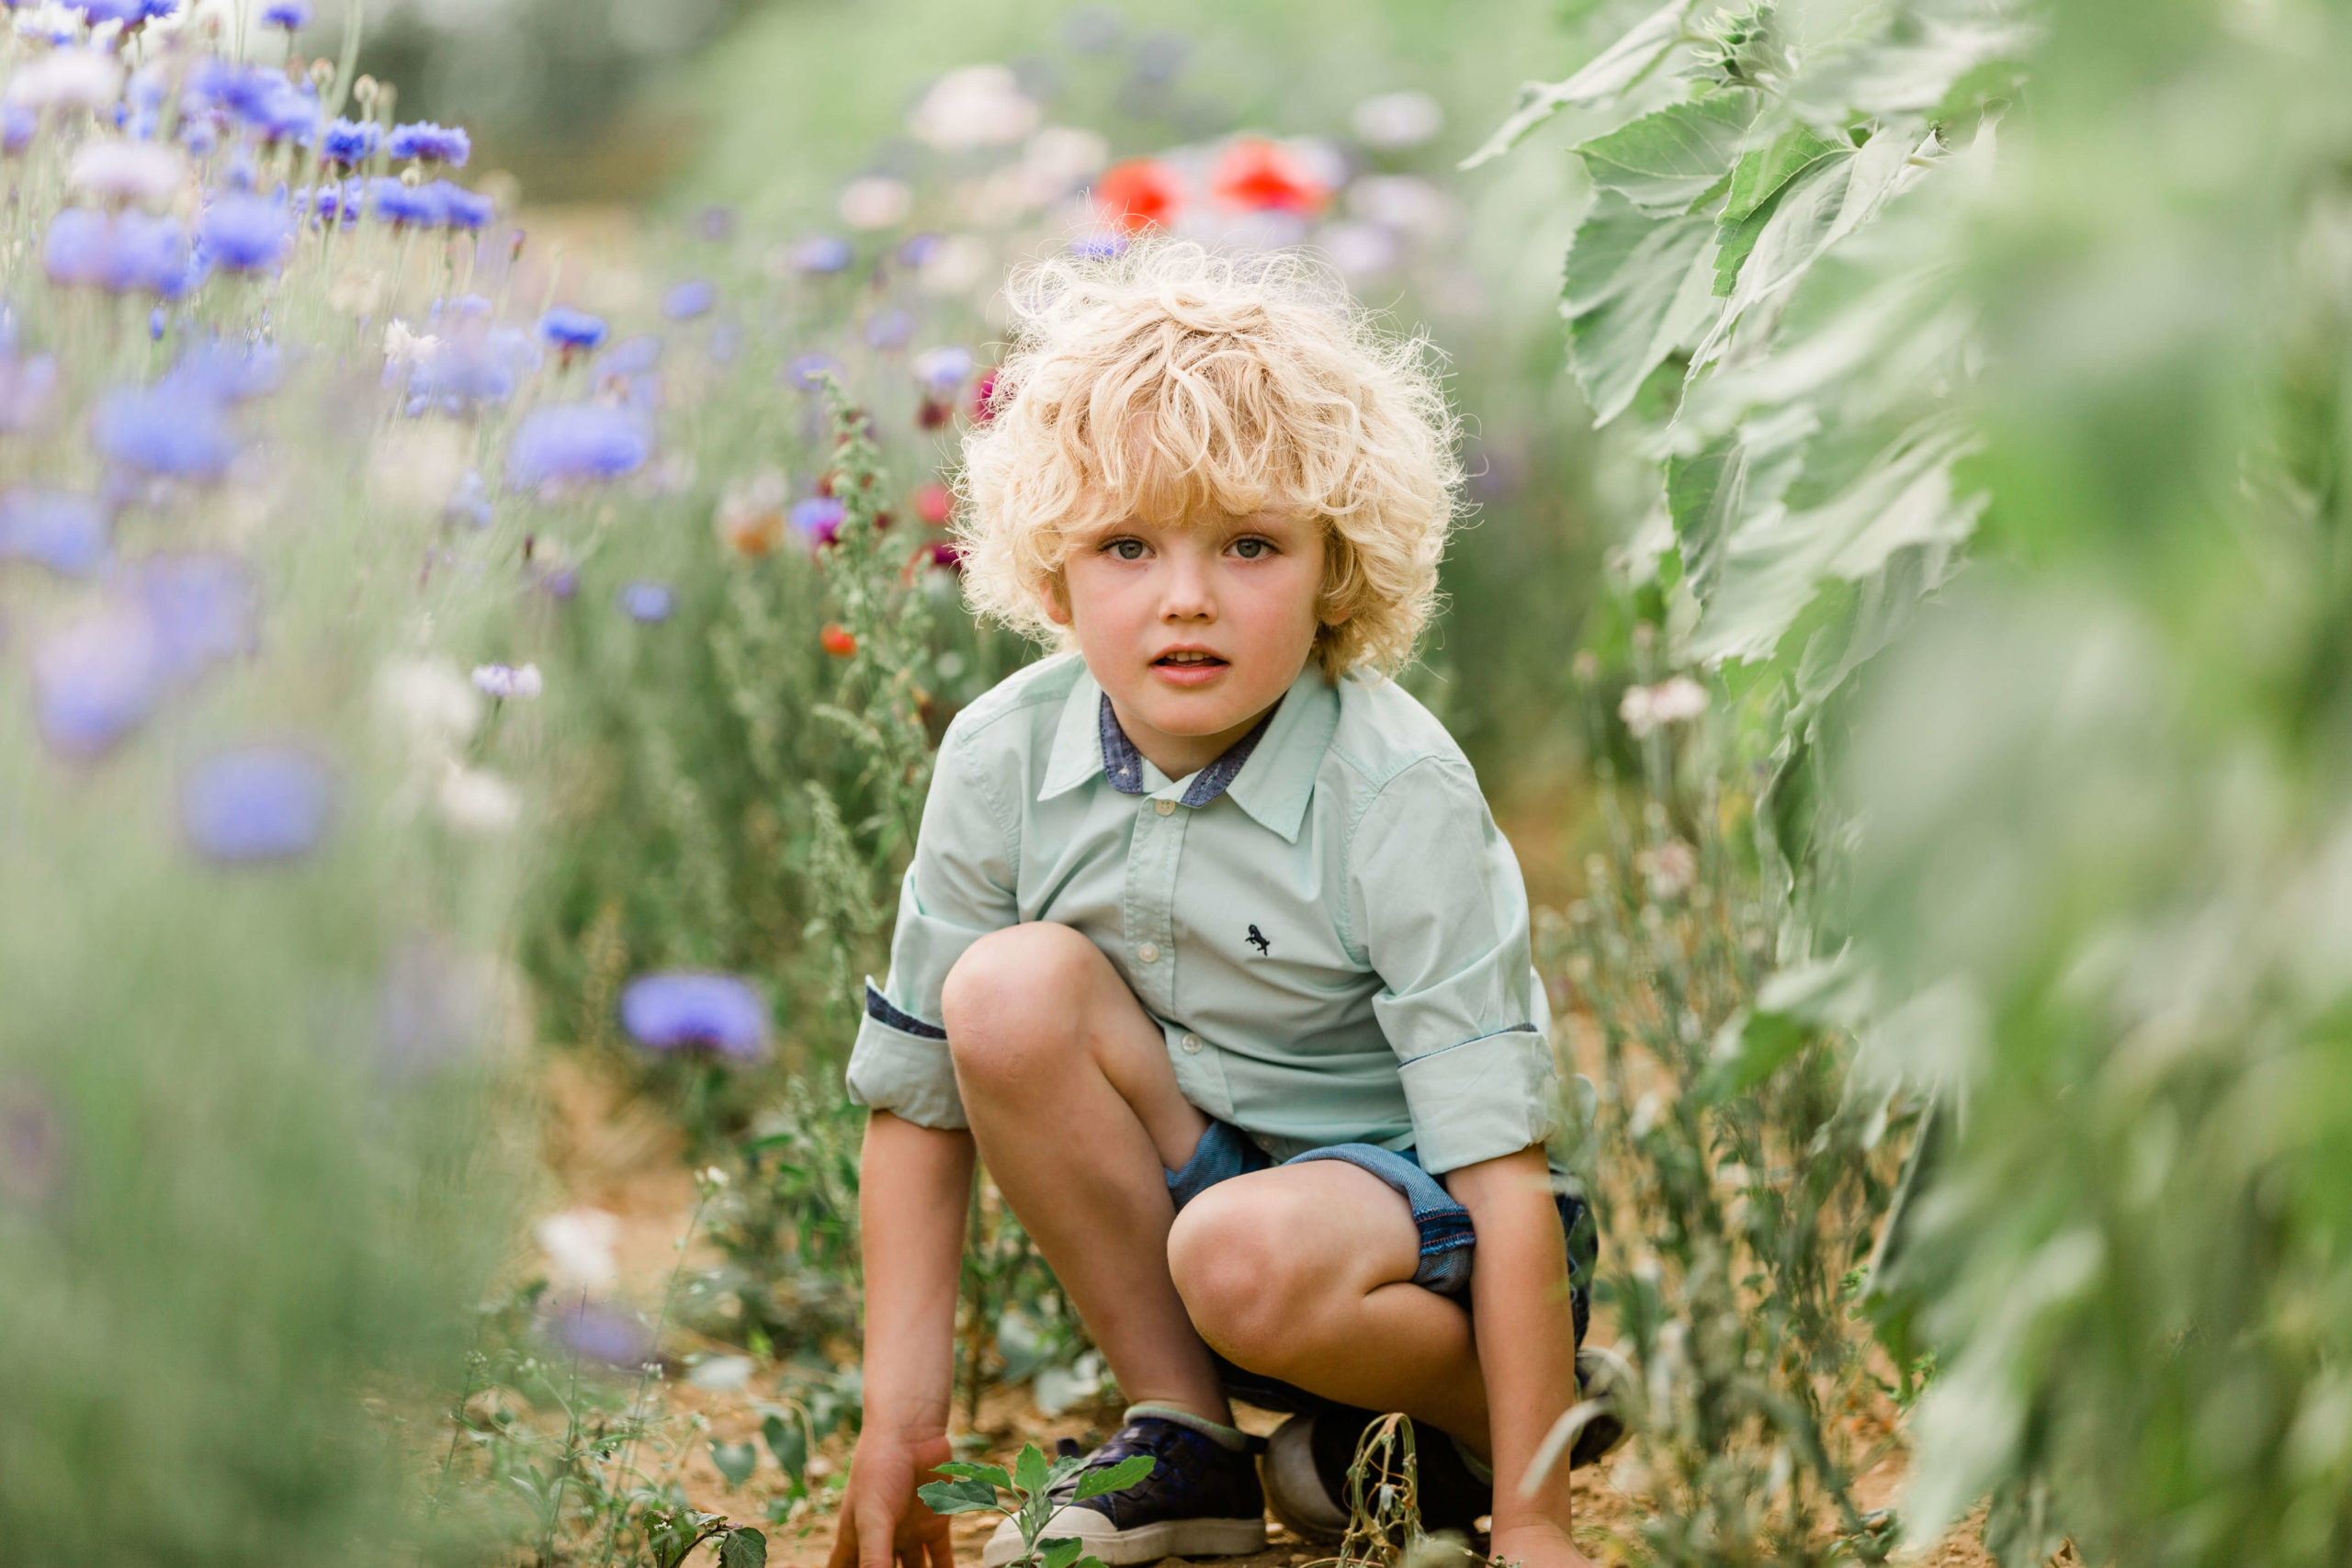 Chelmsford photographer Kika Mitchell Photography's ultimate meadow shoot at Writtle Sunflowers